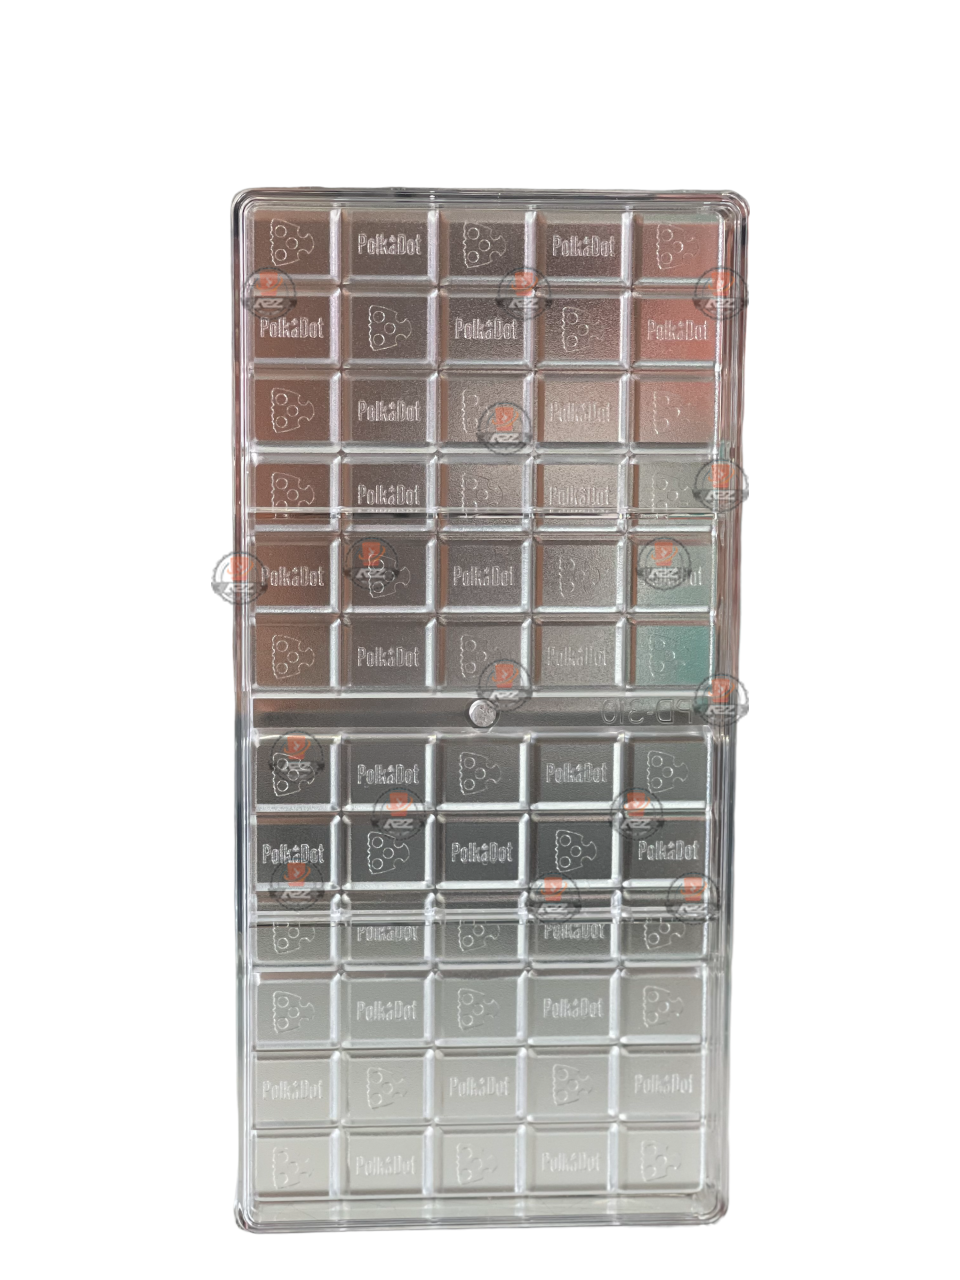 Wholesale Food Grade Mushroom Bar Molds With Pvc Chocolate Boxes  Transparent Lattice Chocolate Mold And Hard Plastic Candy Mould For One Up  PolkaDot Package Box From Fiminyvape2023, $10.56